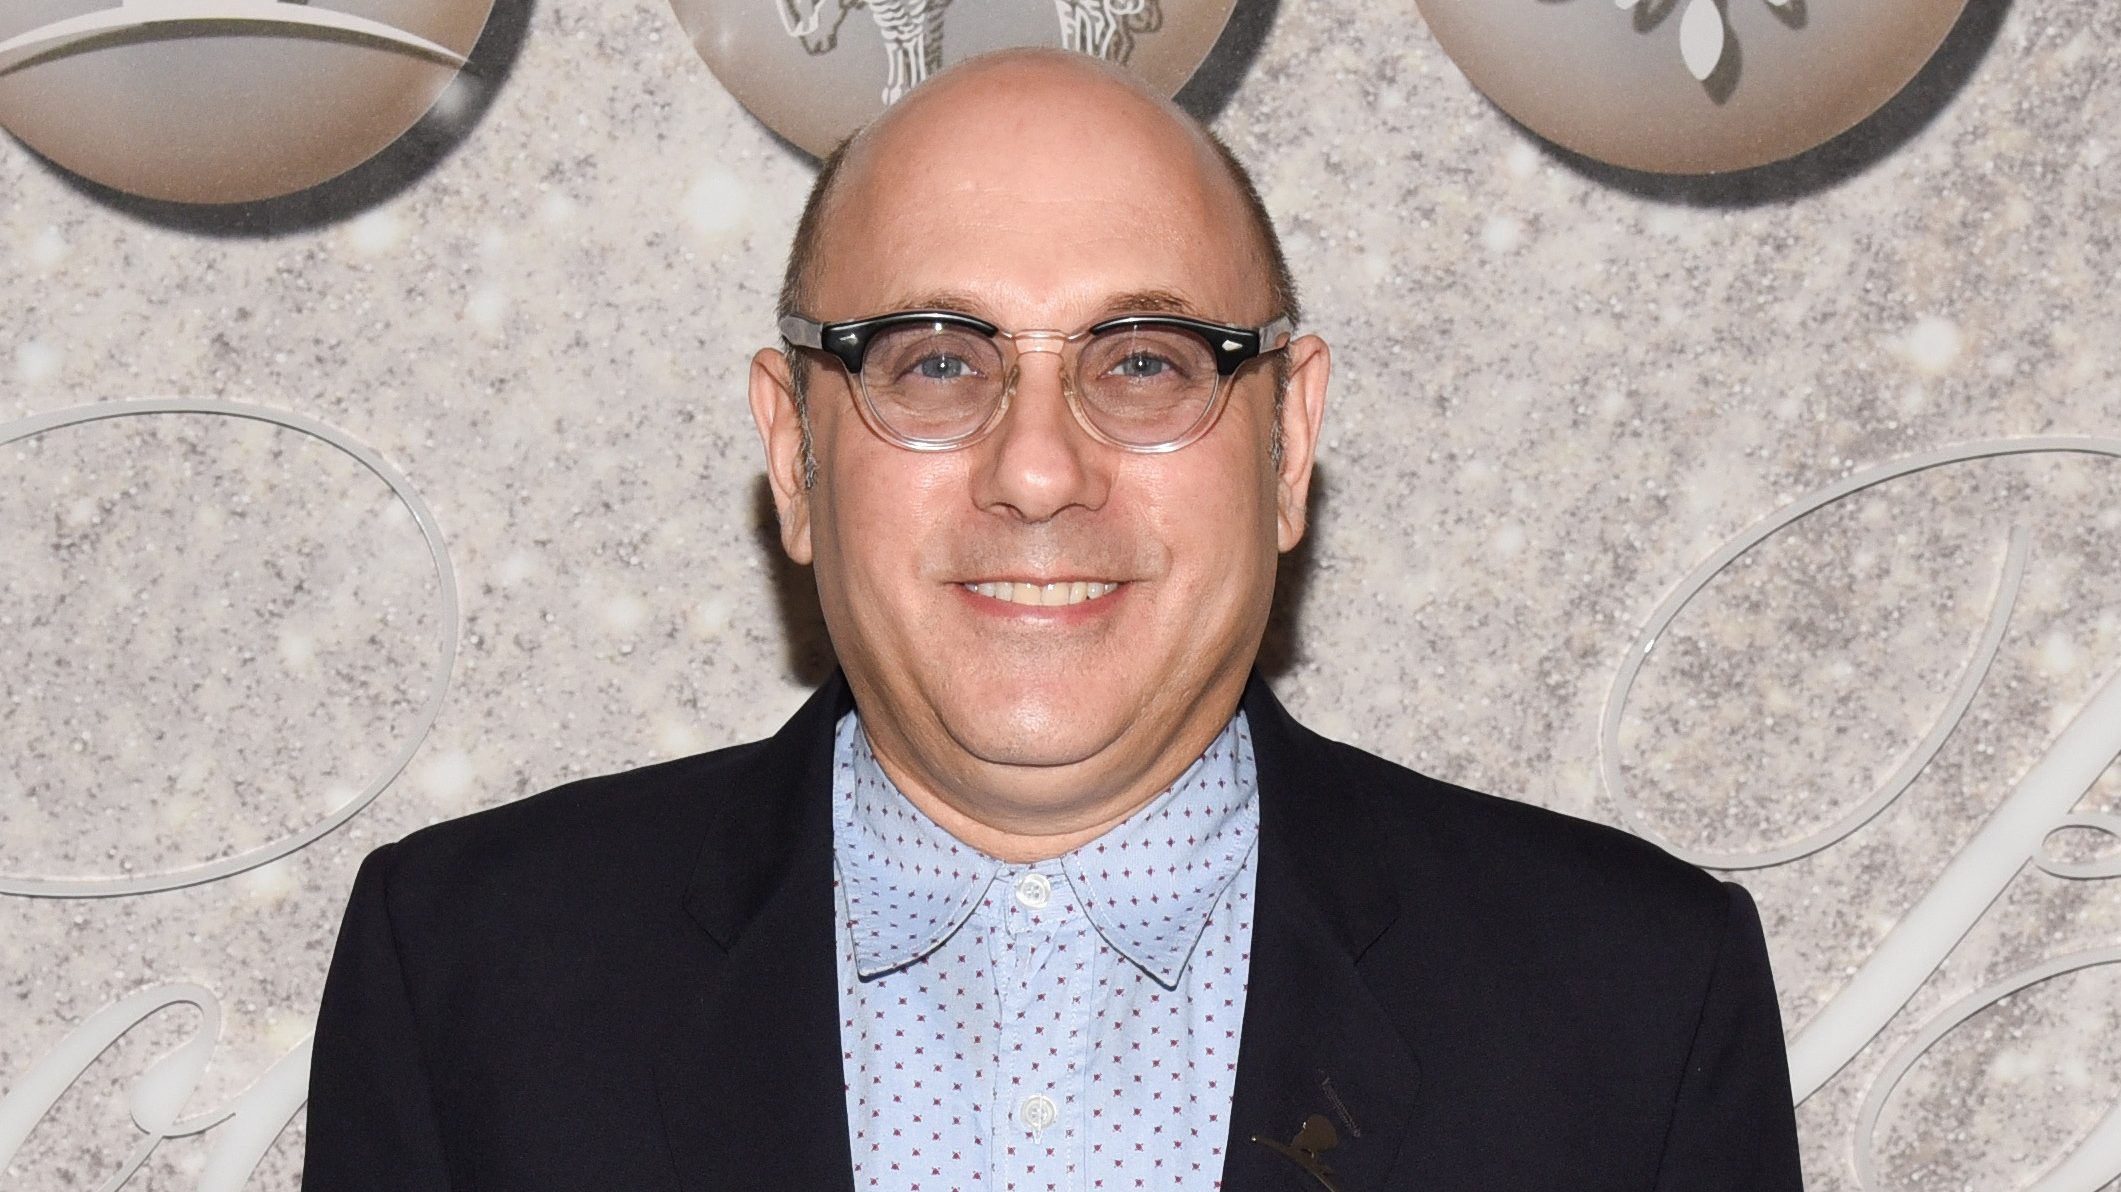 Sex and the City Star Willie Garson dead And cause of death revealed to be pancreatic cancer in obituary!